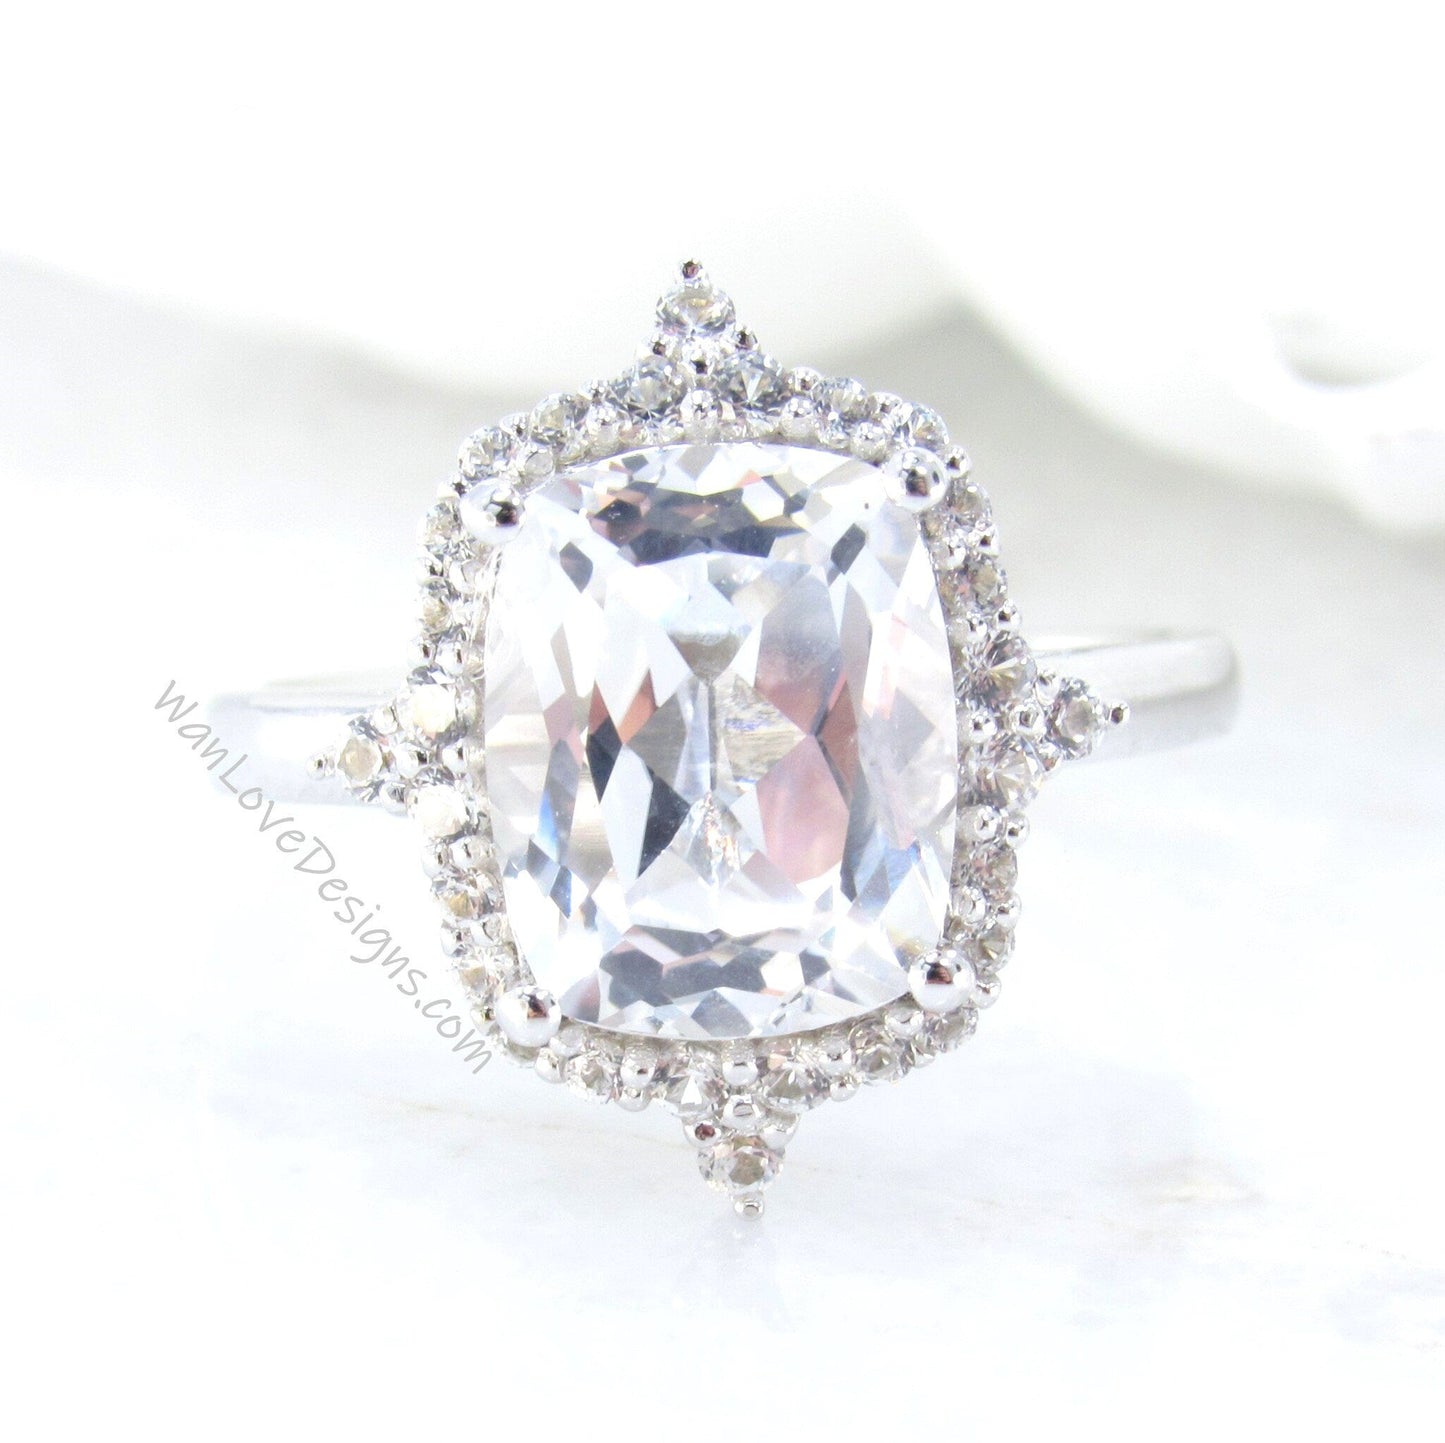 4ct Unique Floral Halo White Sapphire Engagement Ring, Elongated Cushion Sapphire Ring, White Gold Bridal Wedding Anniversary, Ready to Ship Wan Love Designs